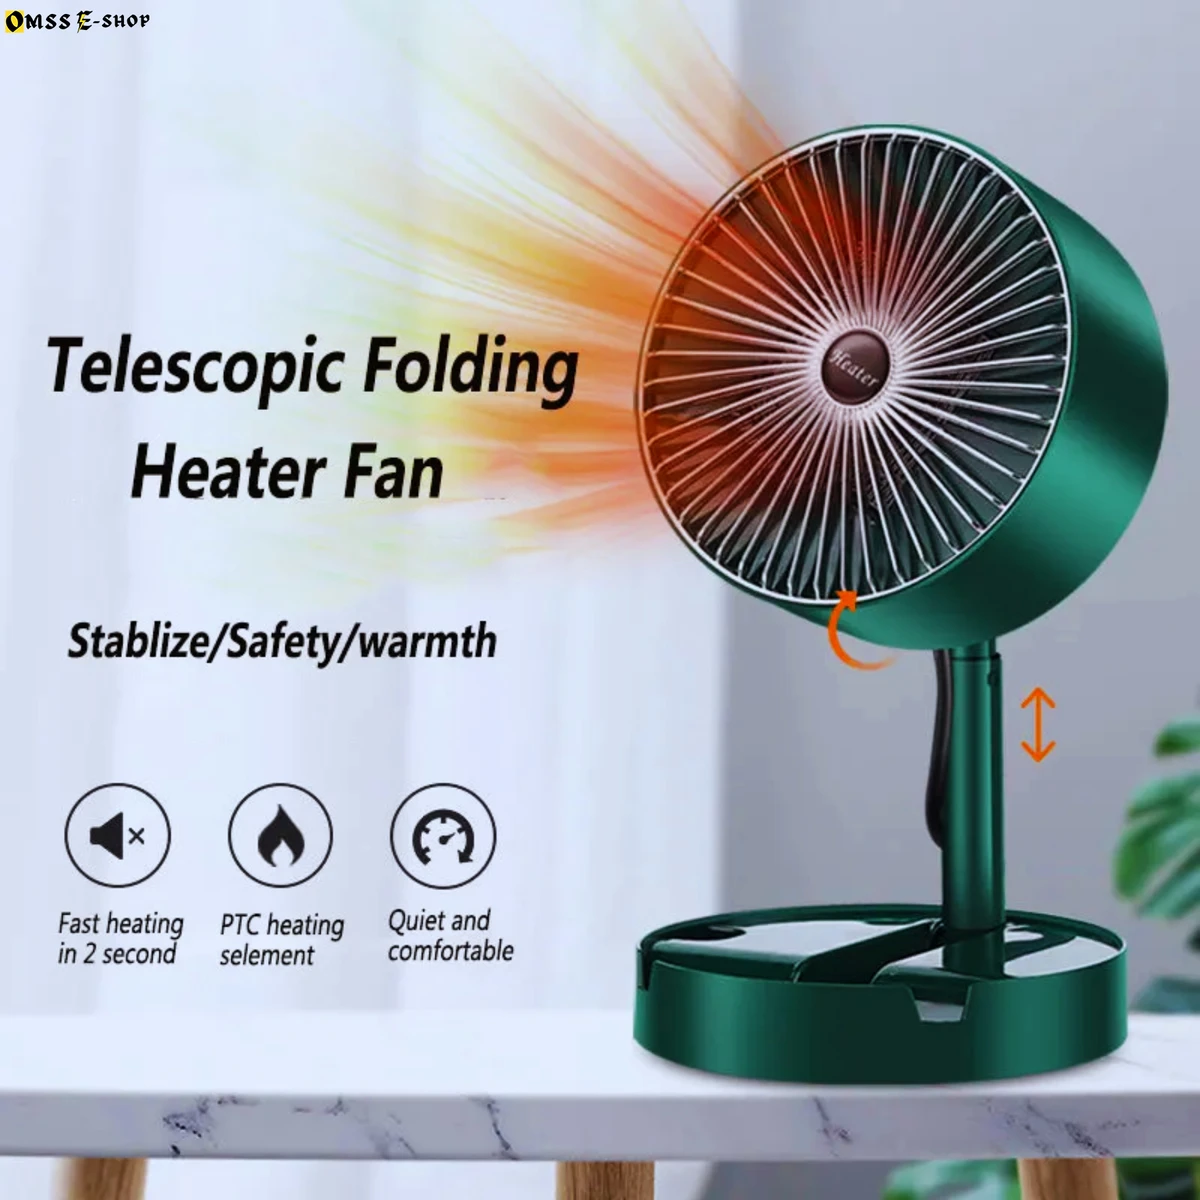 Foldable and Height Adjustable 180° Wide Angle Room Heater for Home-Office, Indoor Portable Fan Heater's Low Energy Silent